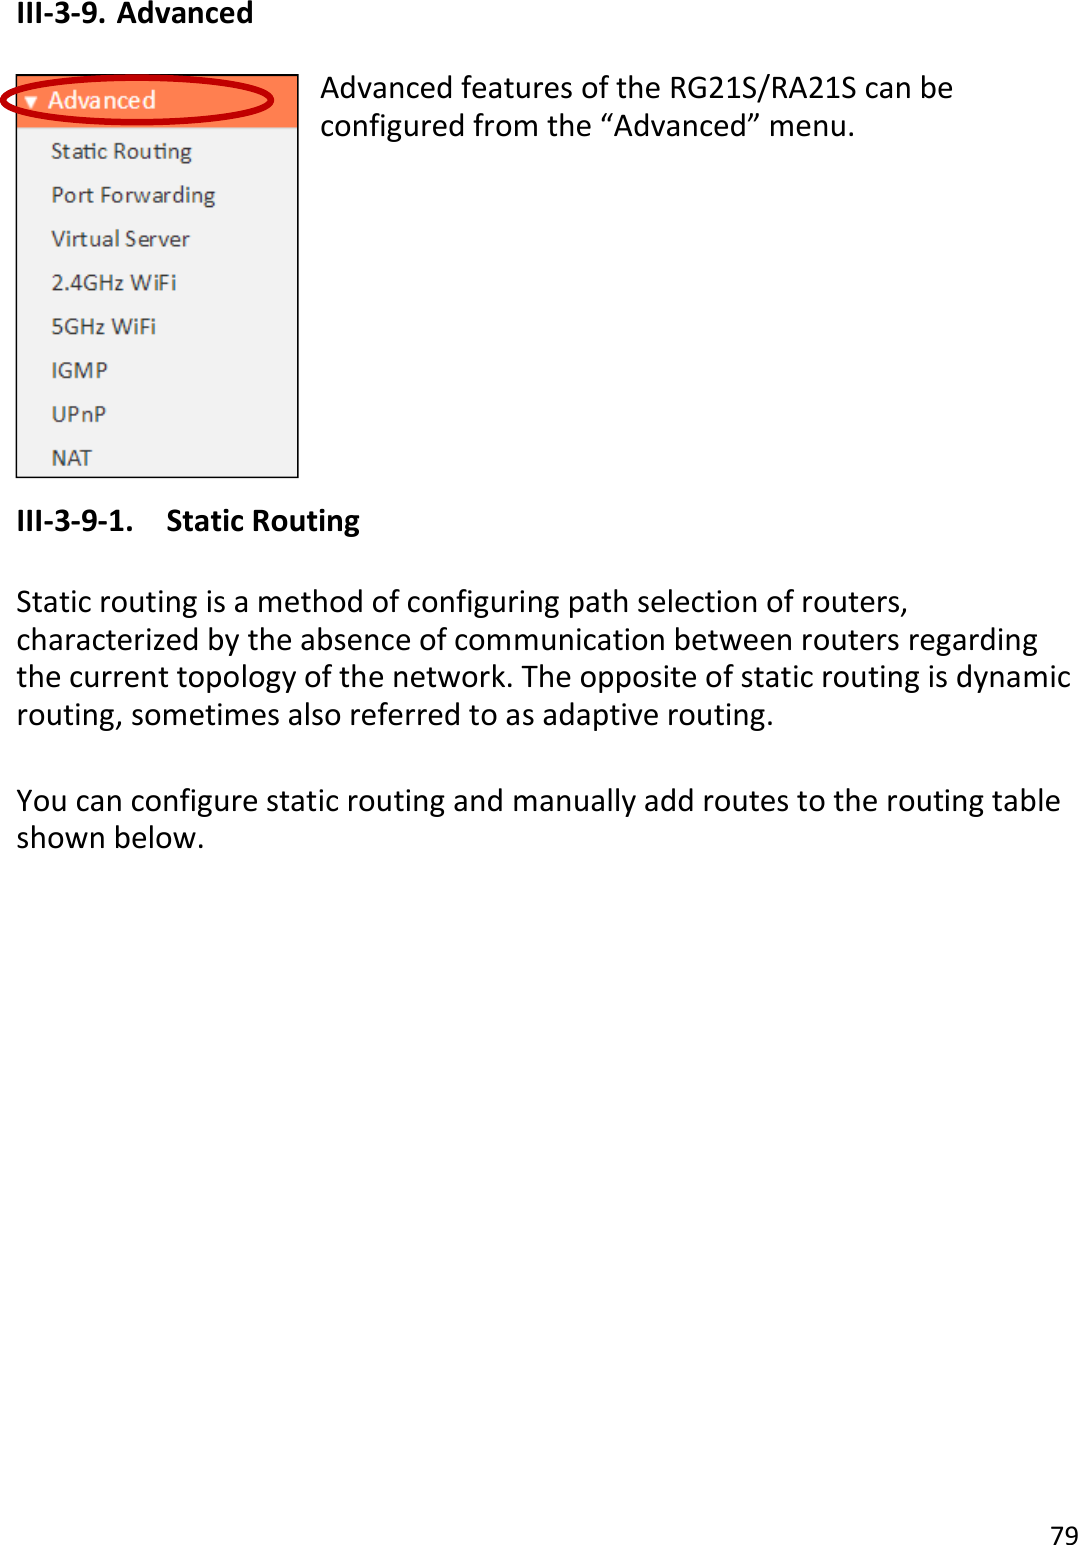 79  III-3-9. Advanced  Advanced features of the RG21S/RA21S can be configured from the “Advanced” menu.          III-3-9-1.  Static Routing  Static routing is a method of configuring path selection of routers, characterized by the absence of communication between routers regarding the current topology of the network. The opposite of static routing is dynamic routing, sometimes also referred to as adaptive routing.  You can configure static routing and manually add routes to the routing table shown below.  